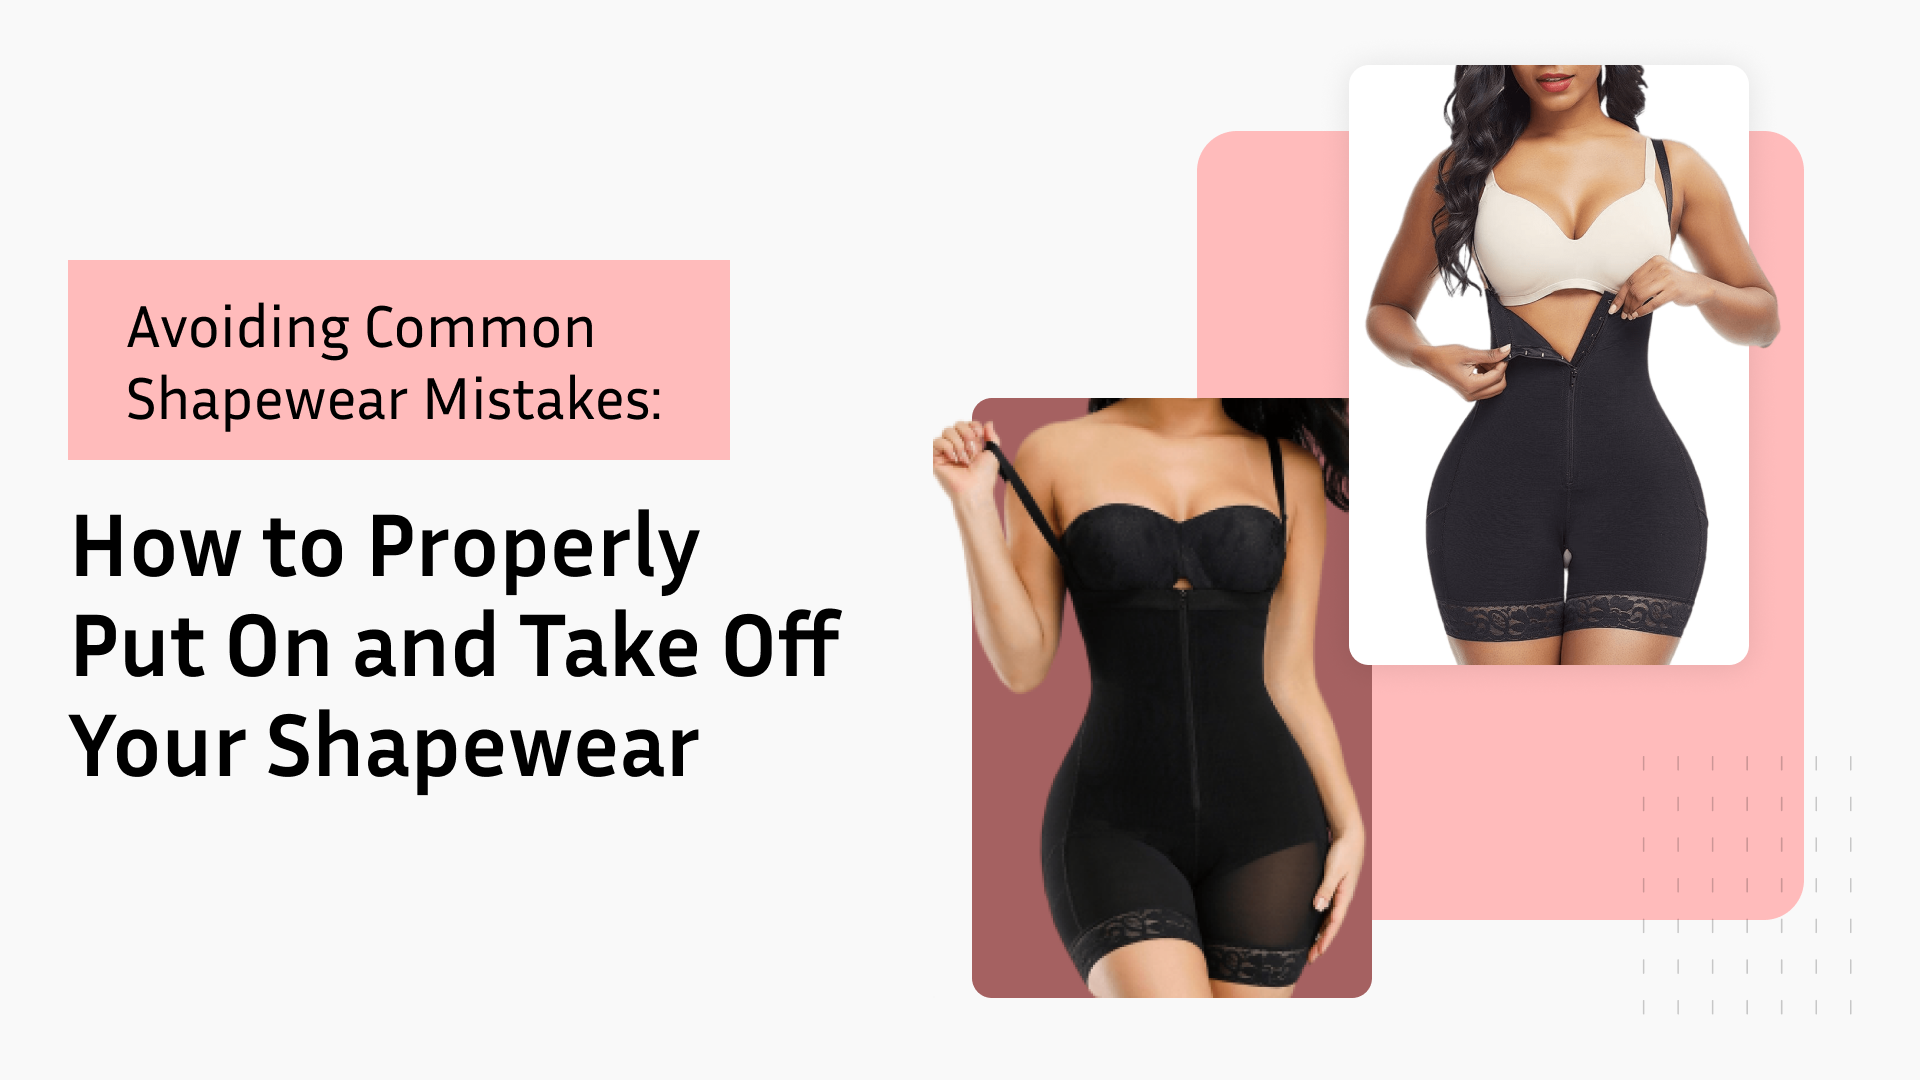 Avoiding Common Shapewear Mistakes: How to Properly Put On and